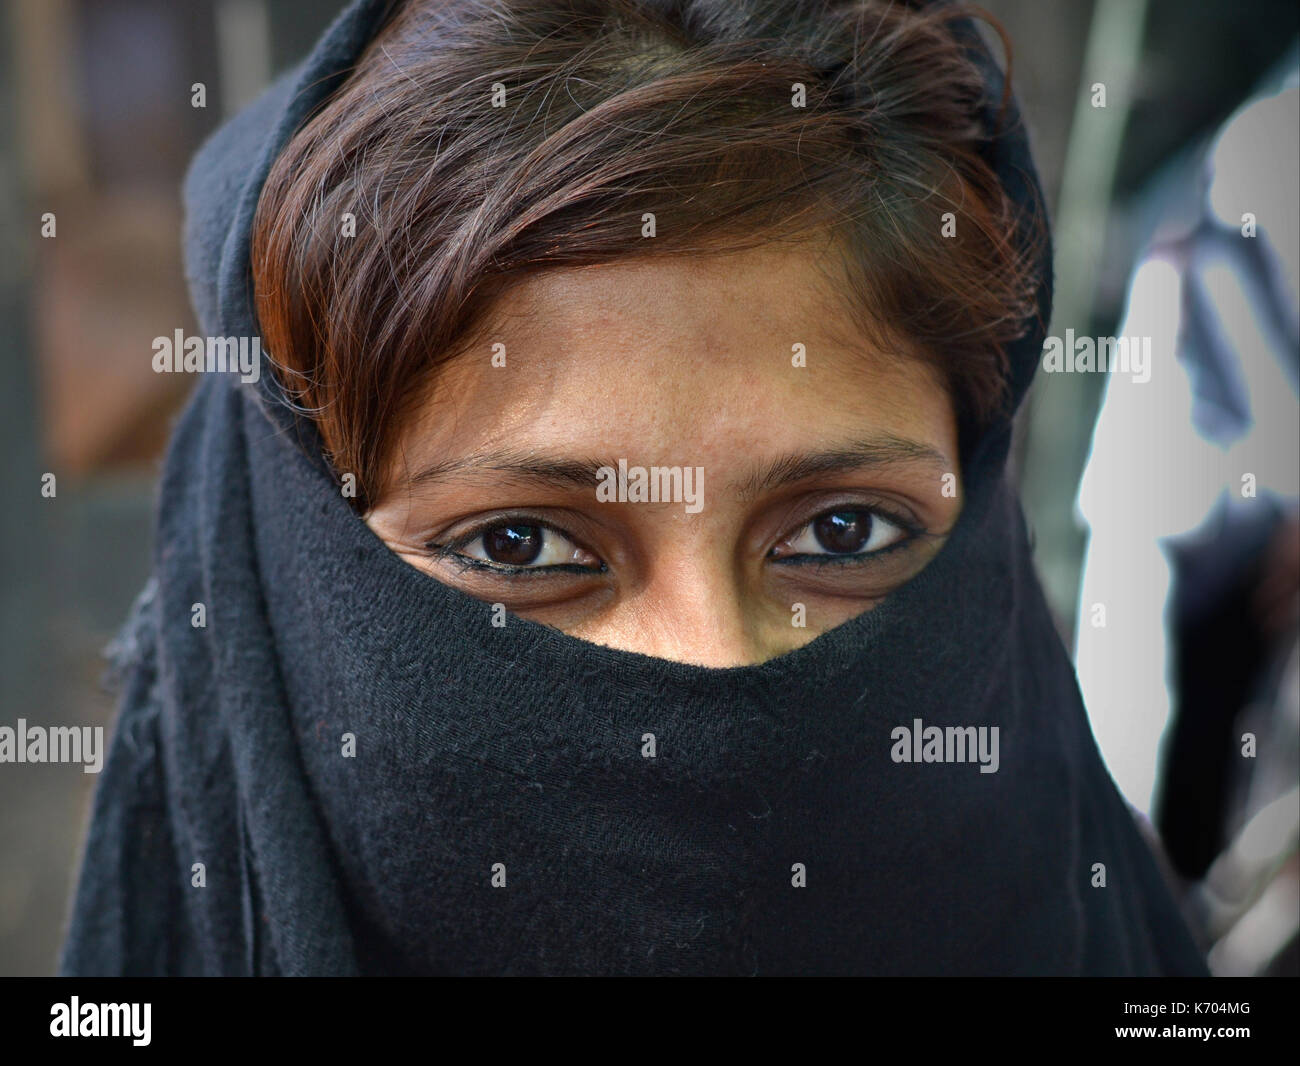 Young Indian Muslimah with smiling eyes wears a casual black niqab and poses for the camera. Stock Photo